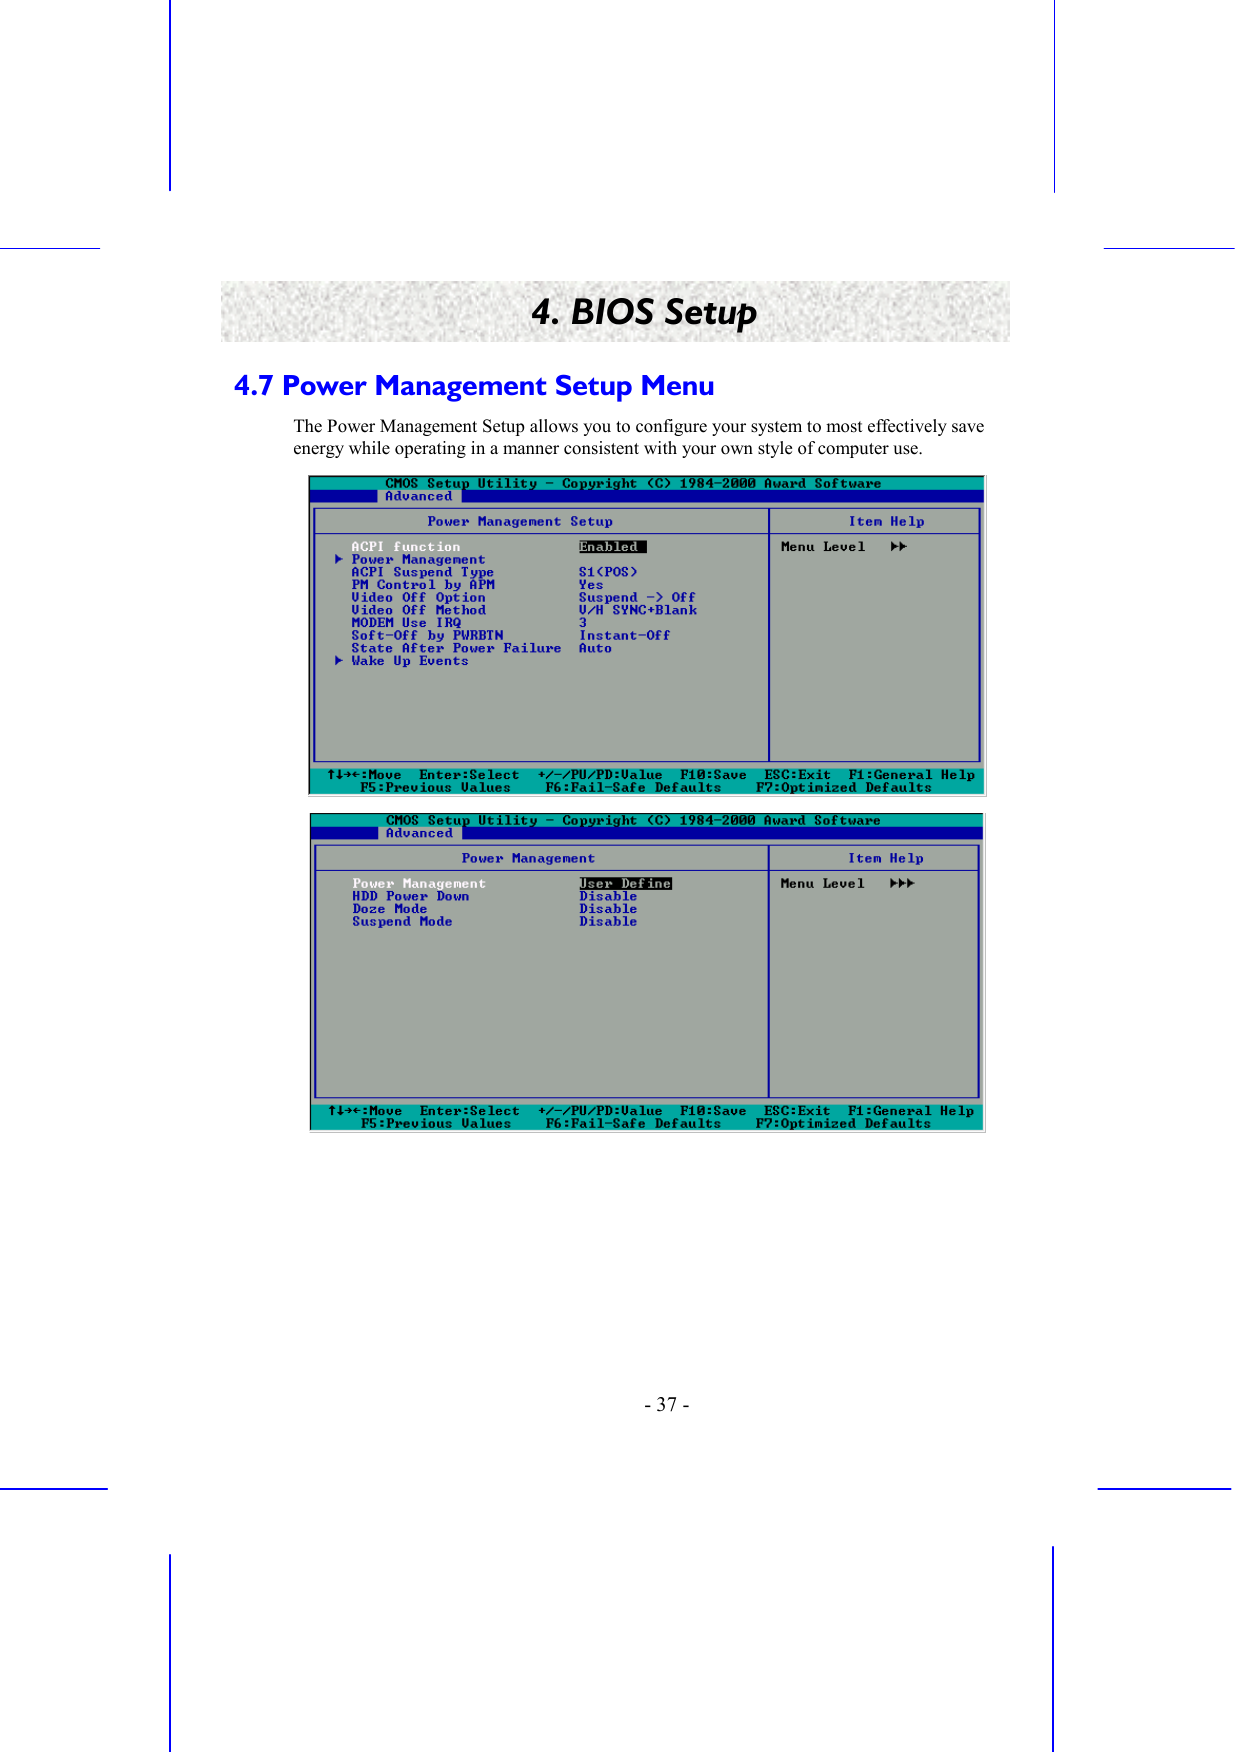    - 37 - 4. BIOS Setup 4.7 Power Management Setup Menu The Power Management Setup allows you to configure your system to most effectively save energy while operating in a manner consistent with your own style of computer use.   